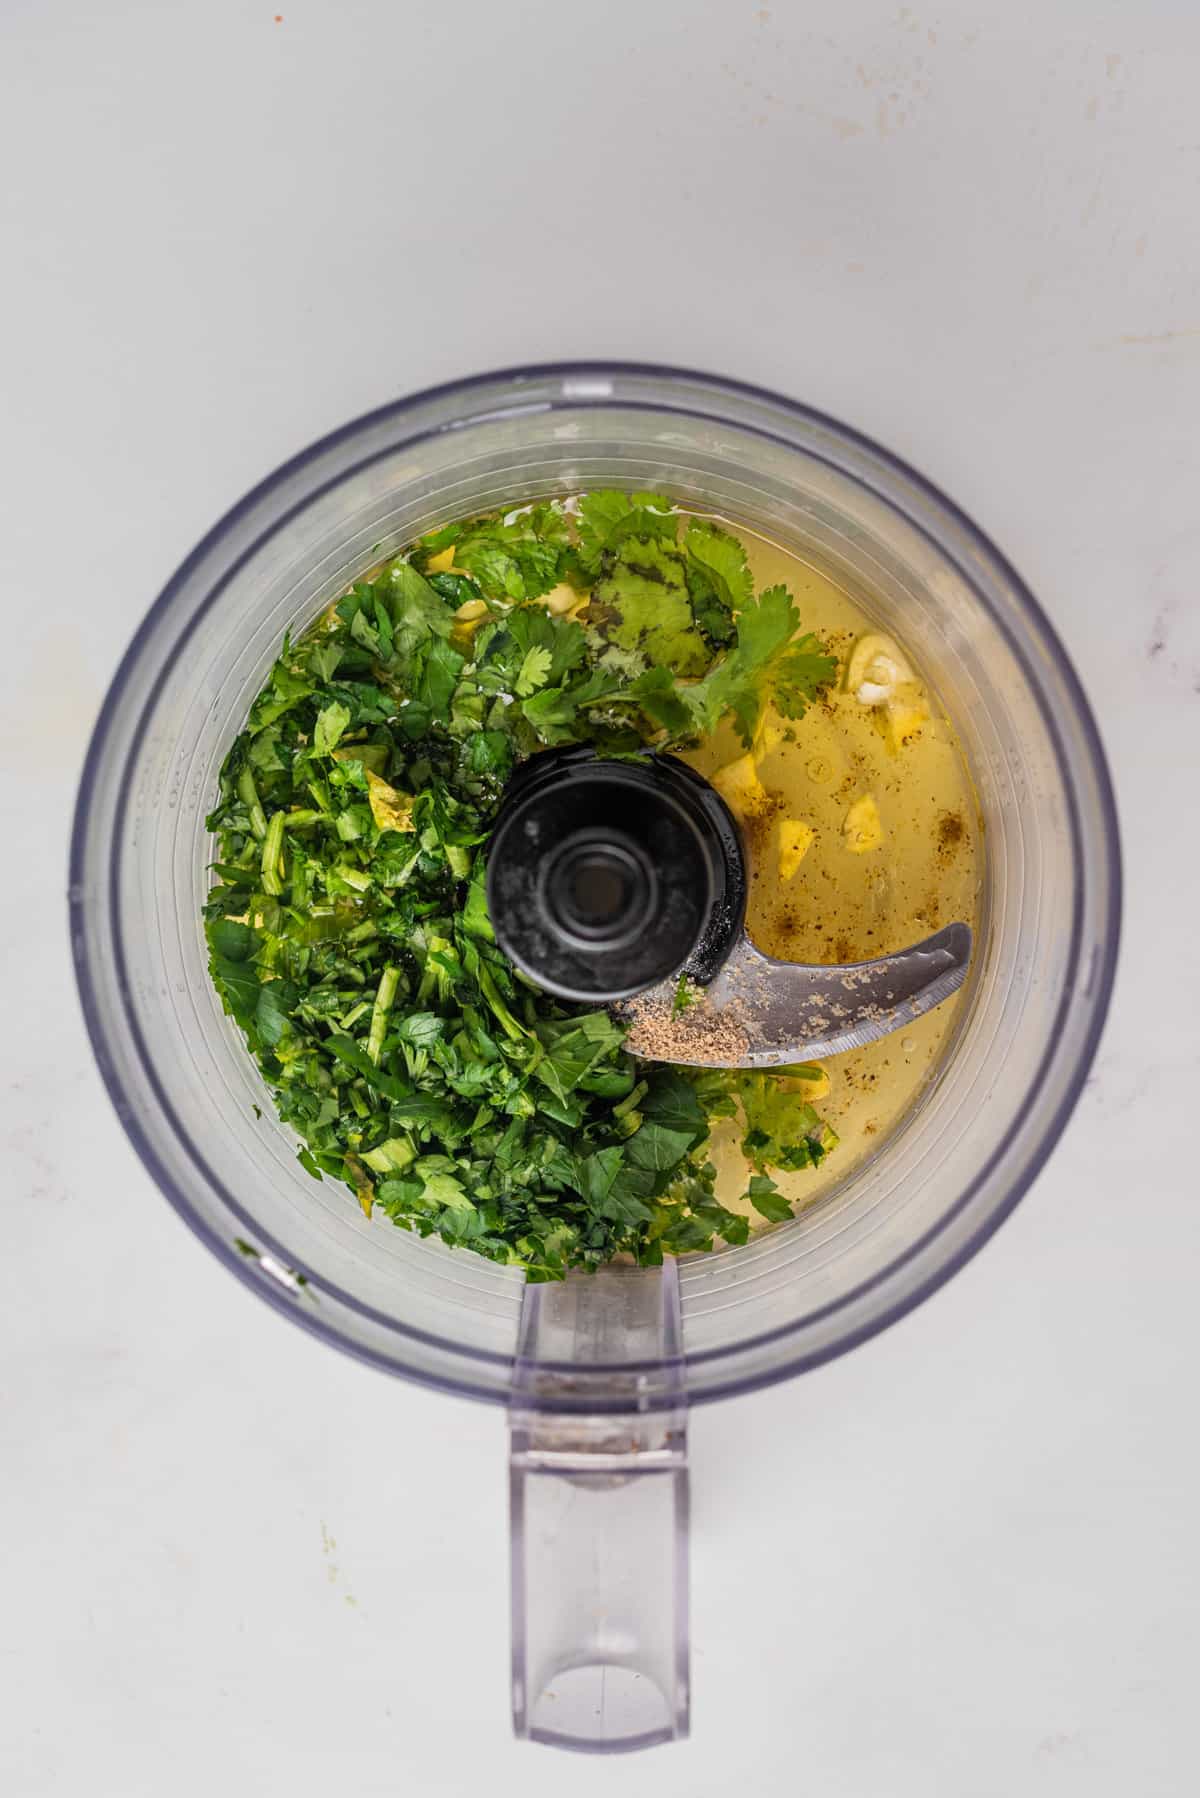 An overhead image of the ingredients before blending in a blender.